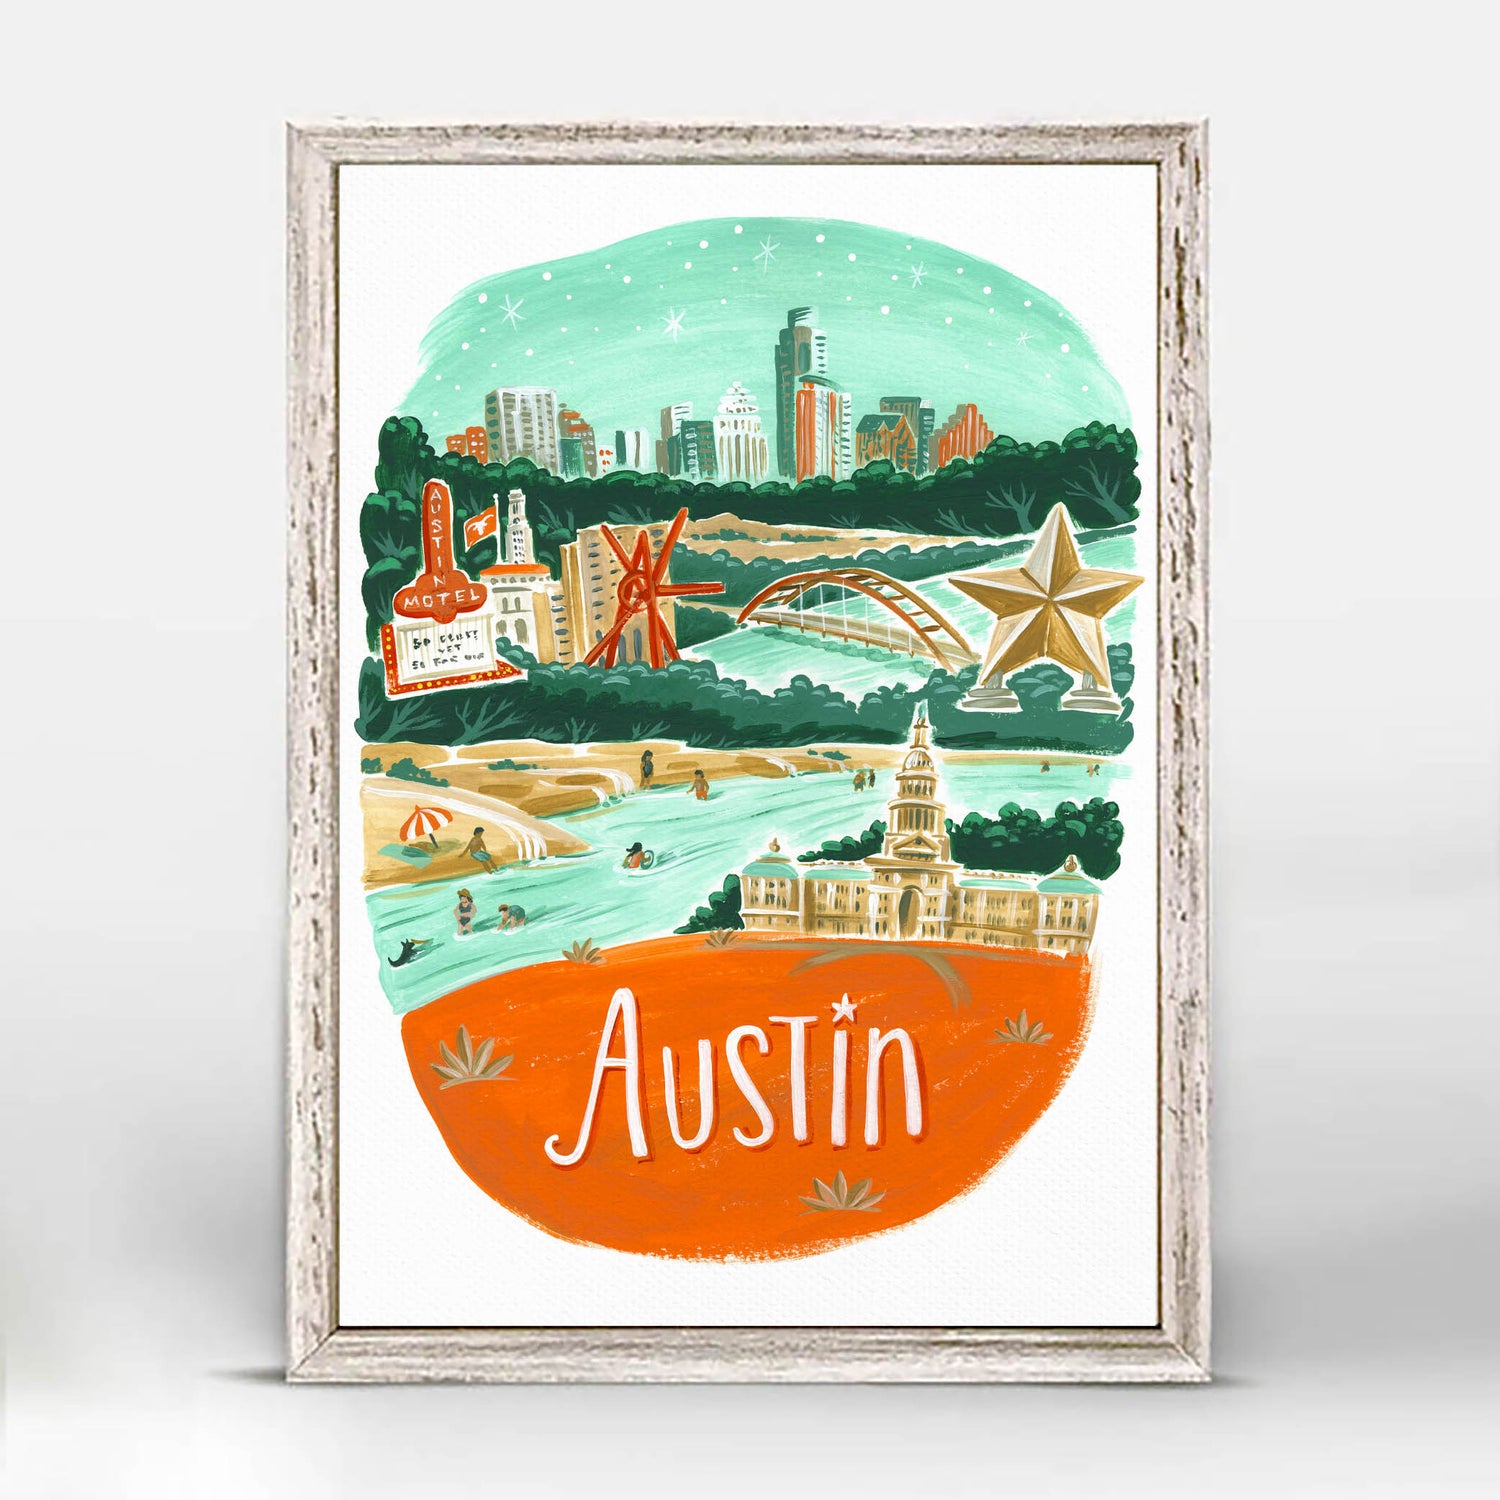 Downtown Austin skyline with famous Austin Motel, Austin Star Statue, and Clock Knot Statue; illustration by Angela Staehling